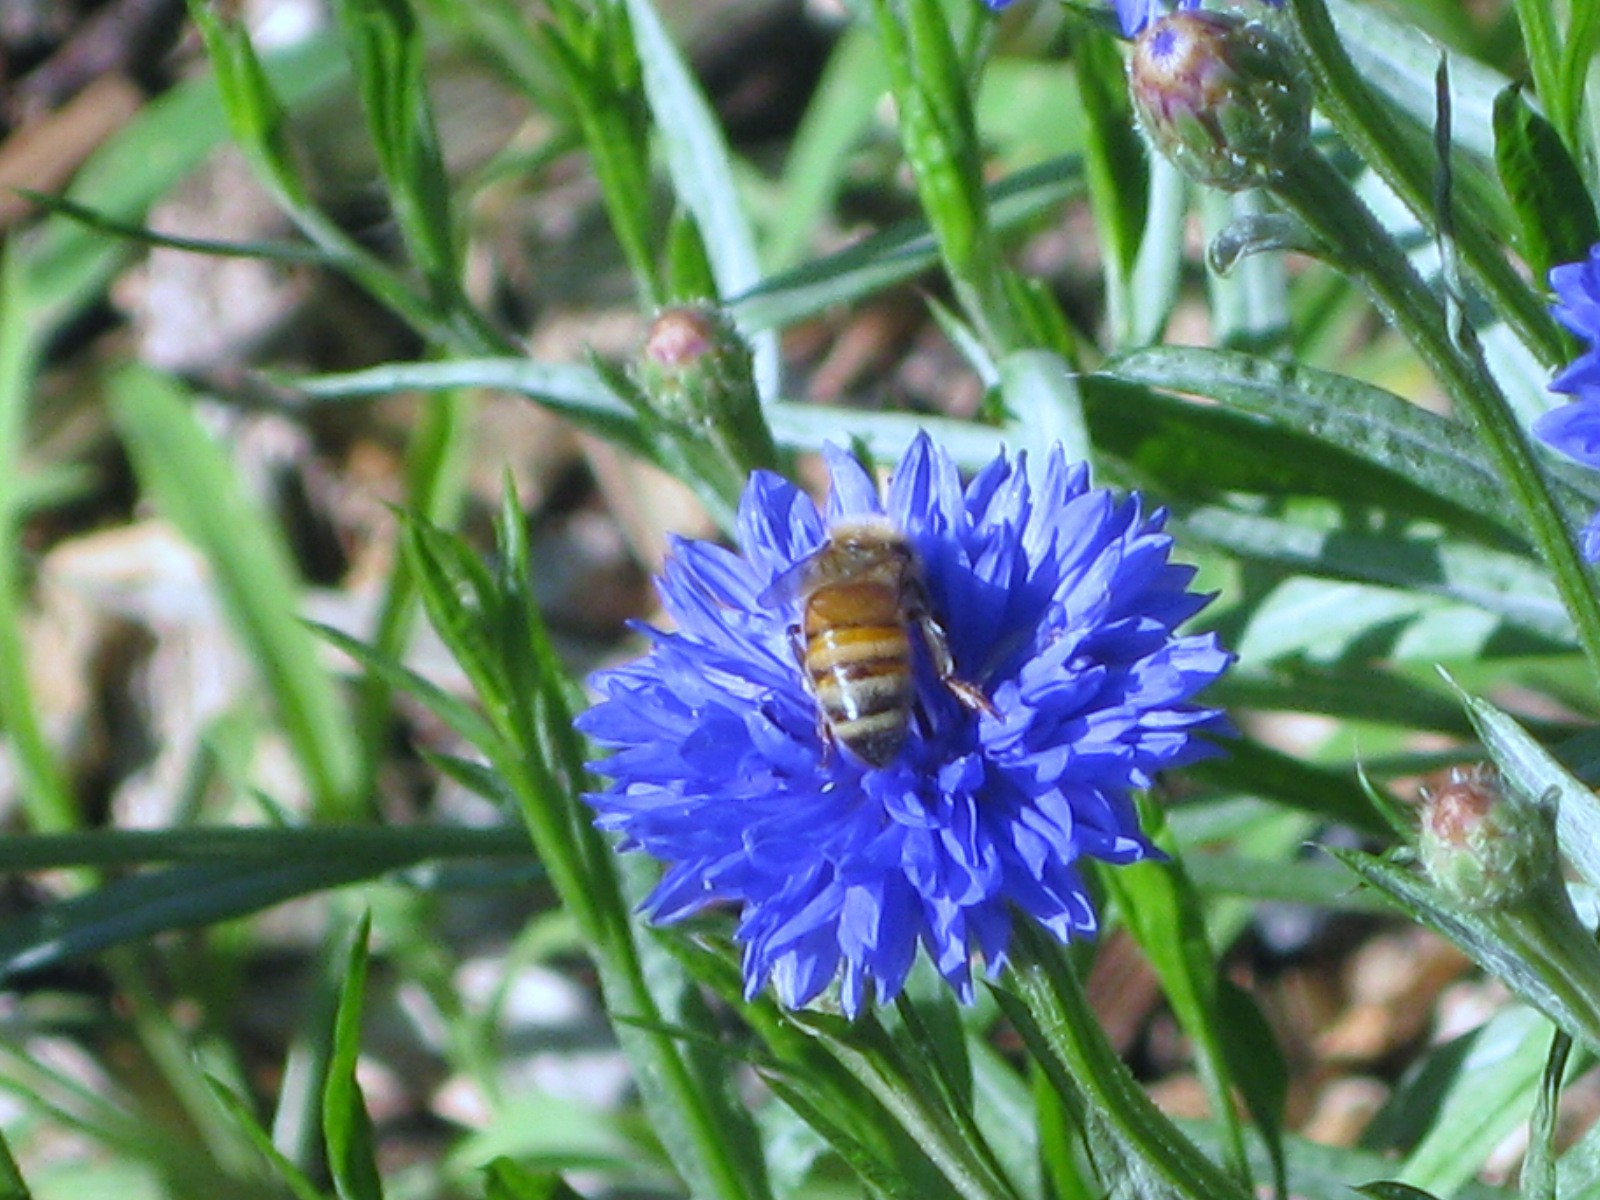 Can You Help the Honey Bees?